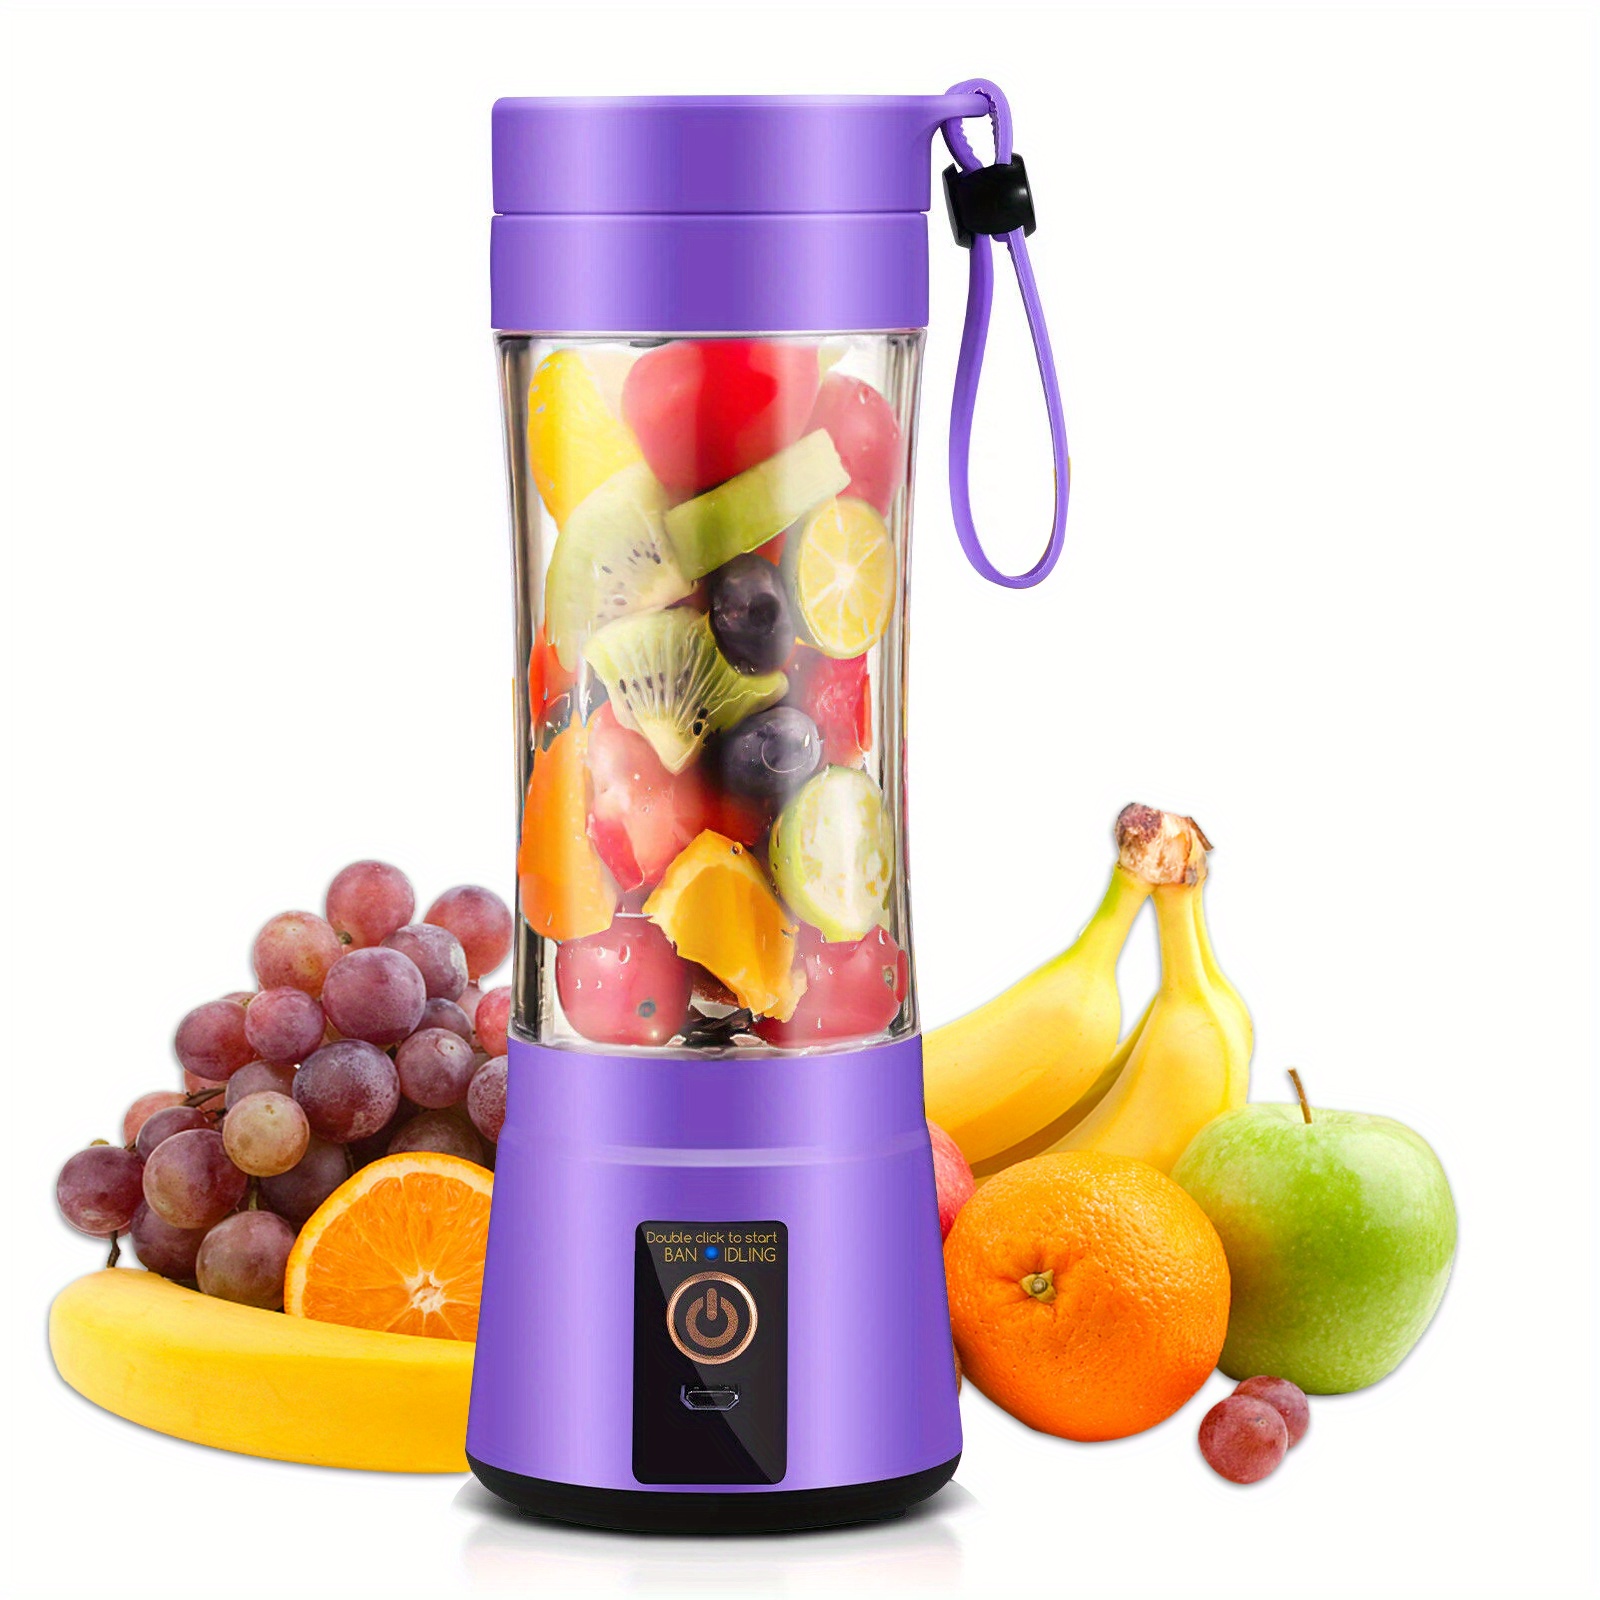 Rechargeable 6 Baldes Personal Blender For Shakes And Smoothies Powerful  Usb Juicer Cup Fruit Fresh Juice Mixer